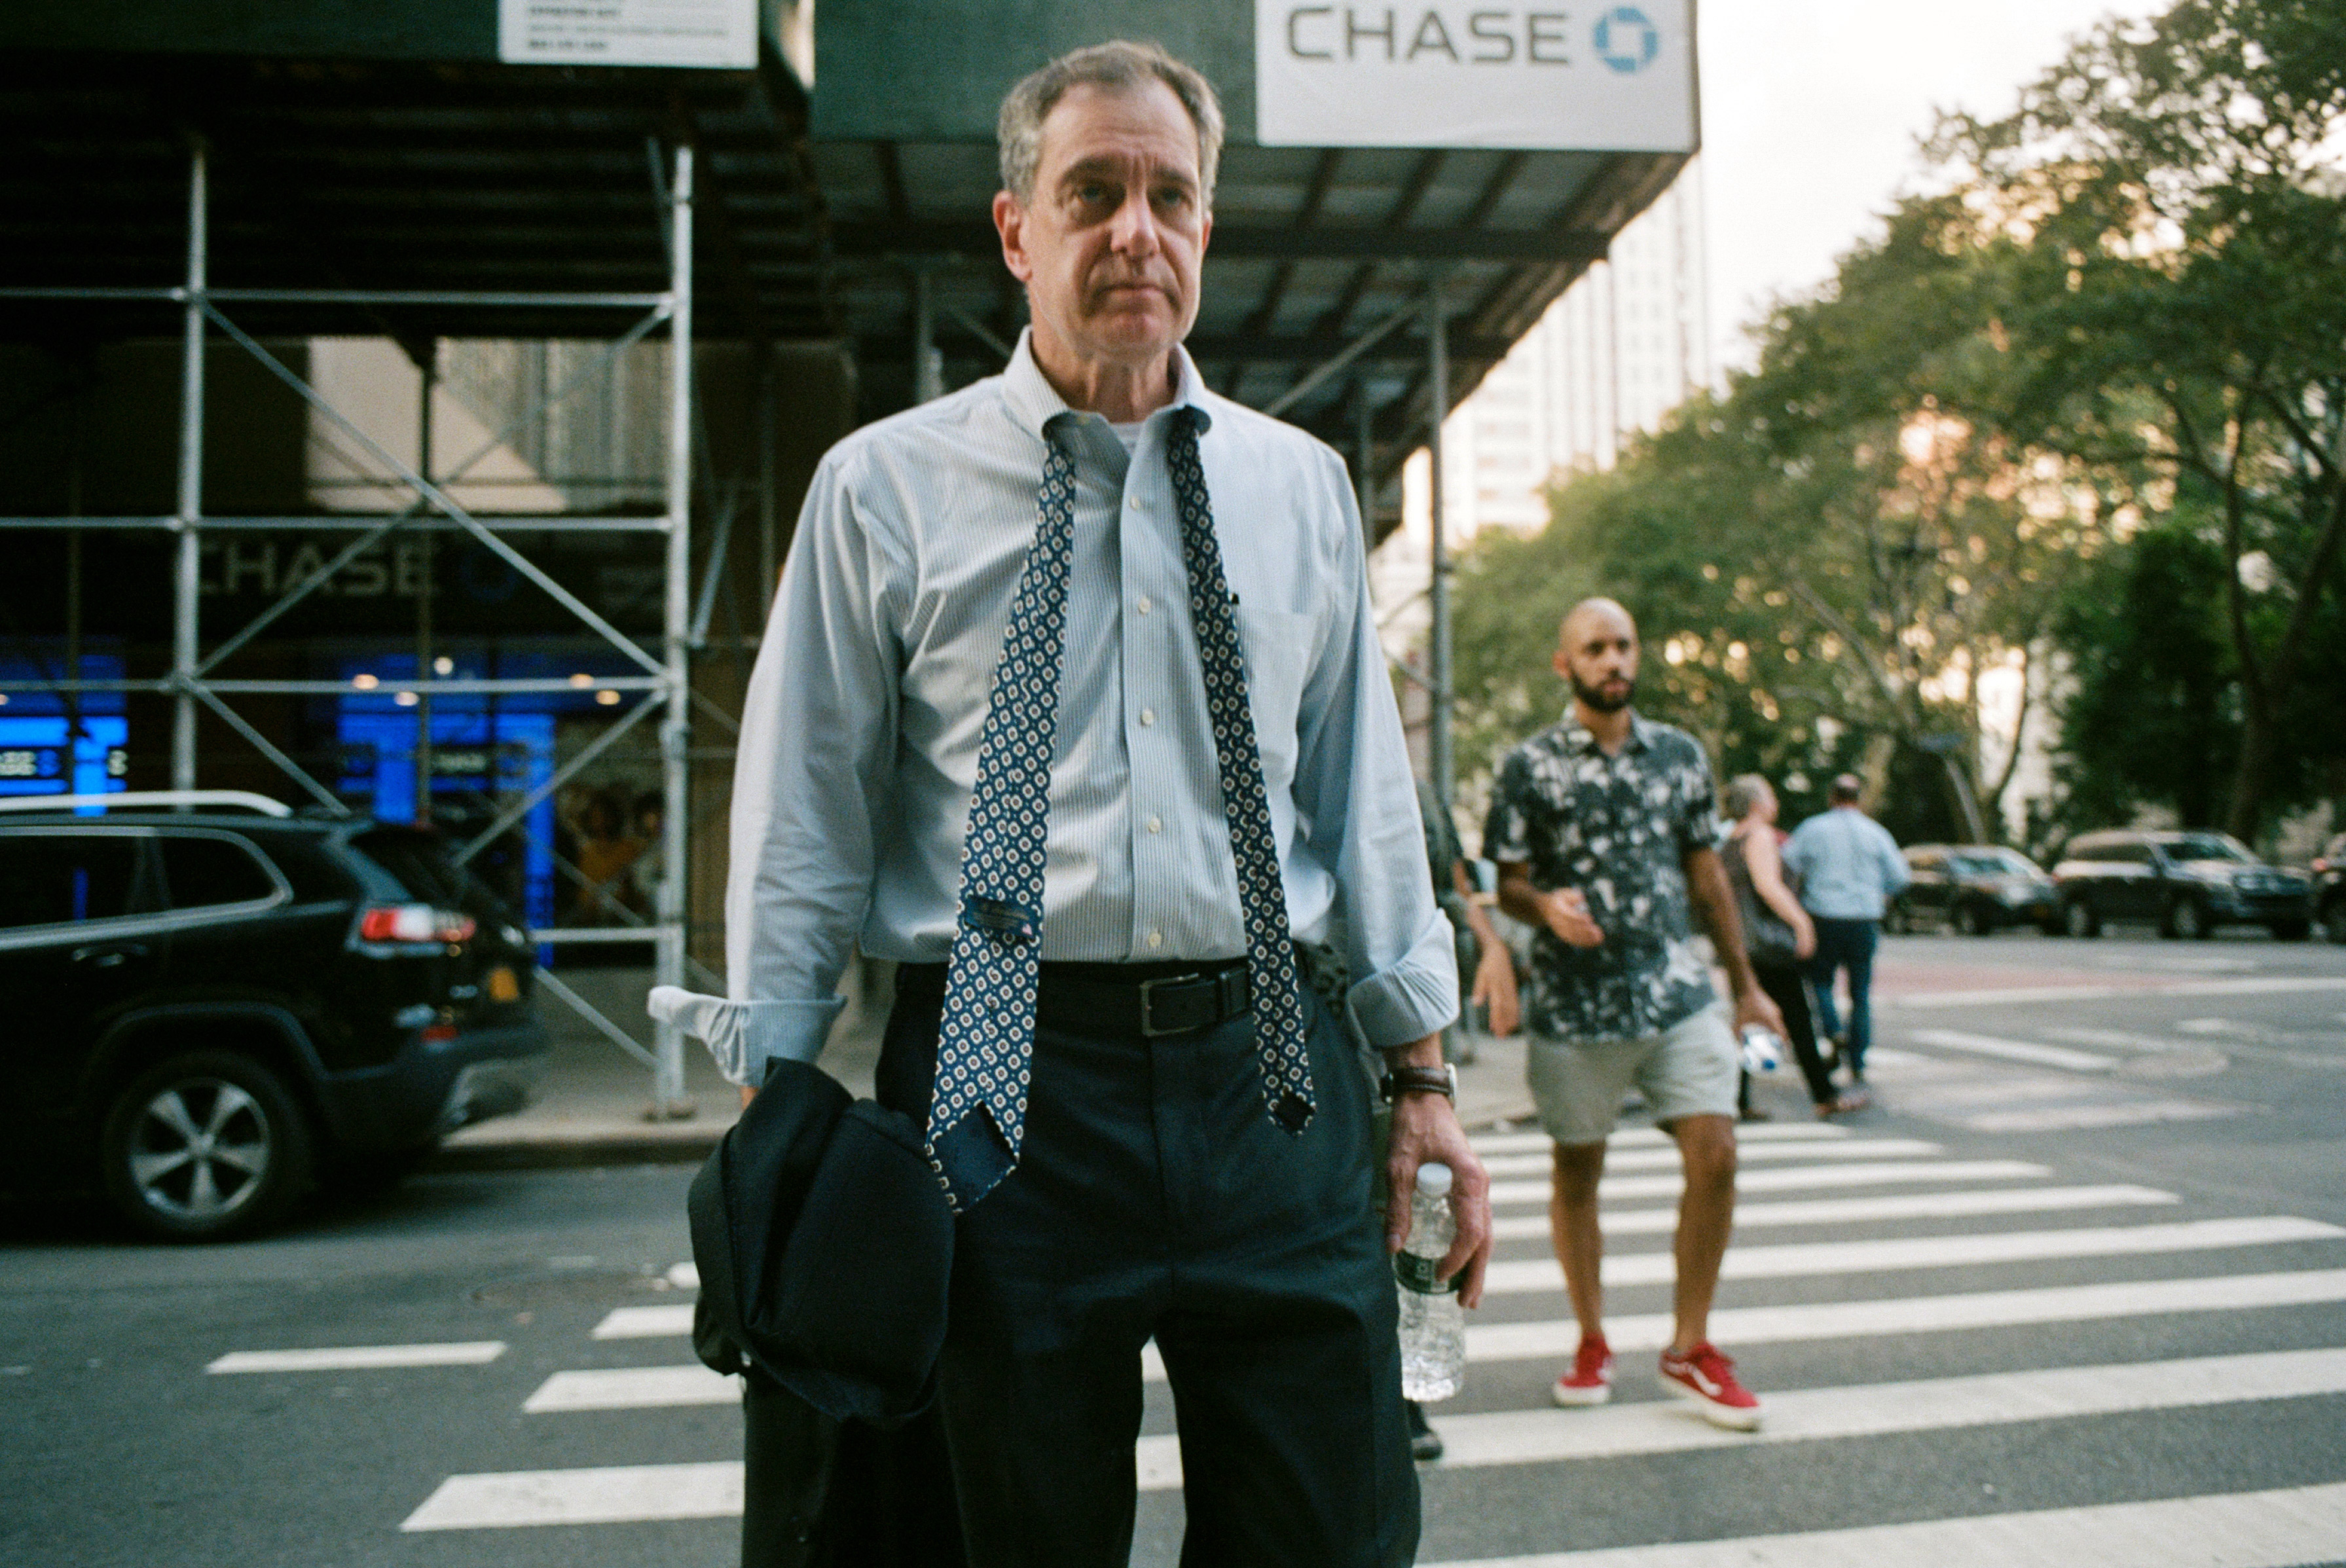 A man with his tie unfurled crosses the street in downtown Manhattan, Aug. 26, 2021. (Daniel Arnold for TIME)